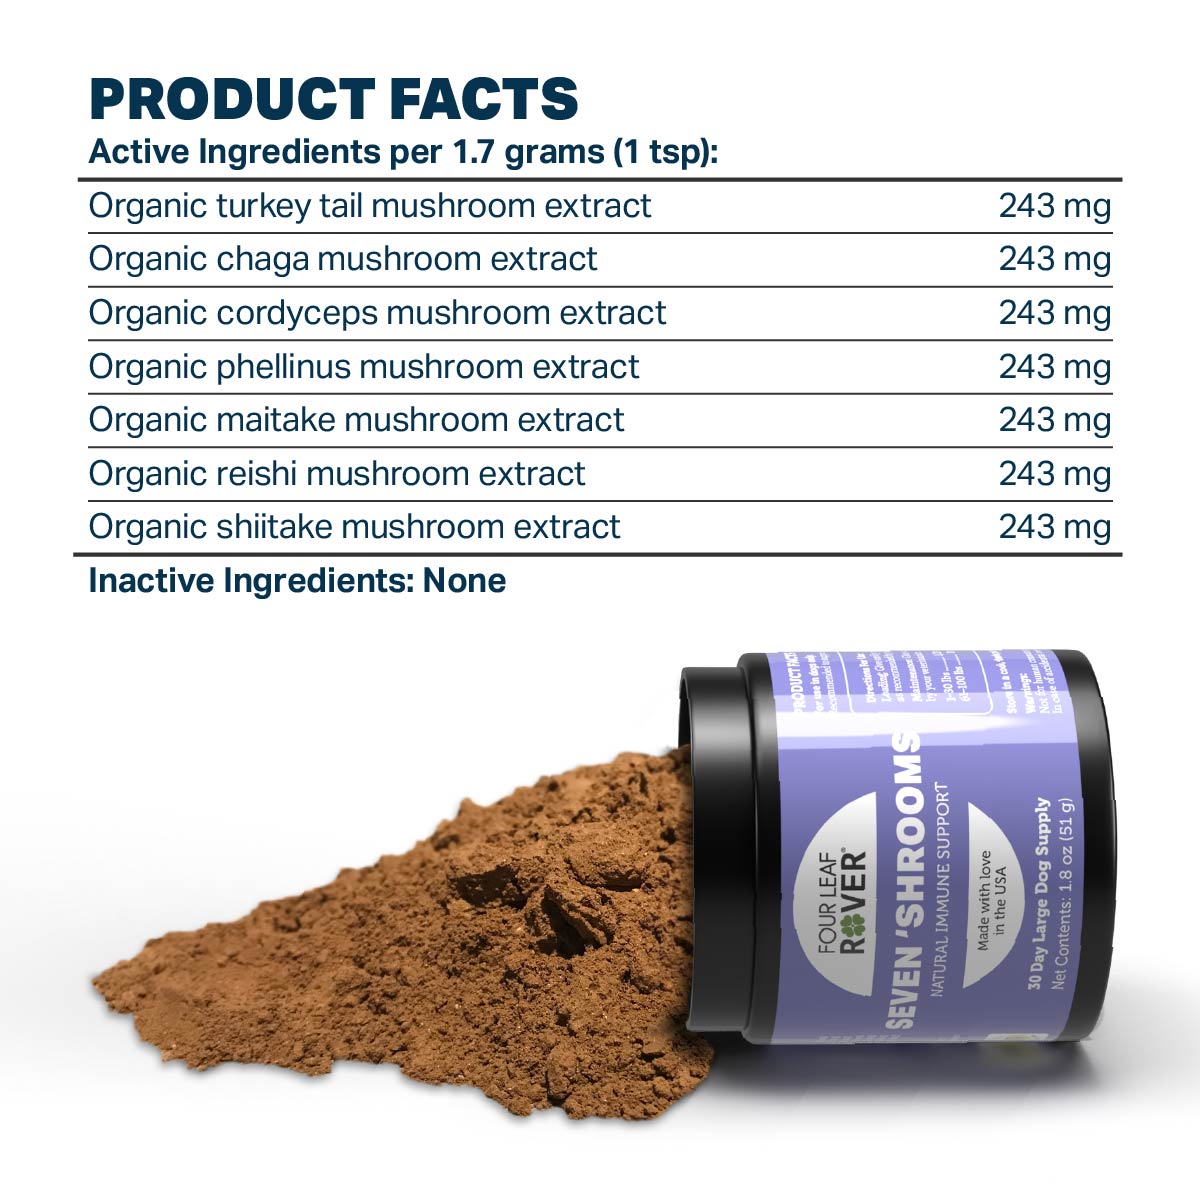 PRODUCT FACTS Actiive Ingredients per 1.7 grams (1 tsp): Organic turkey tail mushroom extract 243 mg Organic chaga mushroom extract 243 mg Organic cordyceps mushroom extract 243 mg Organic phellinus mushroom extract 243 mg Organic maitake mushroom extract 243 mg Organicreishi mushroom extract 243 mg Organic shiitake mushroom extract 243 mg Inactive Ingredients: None